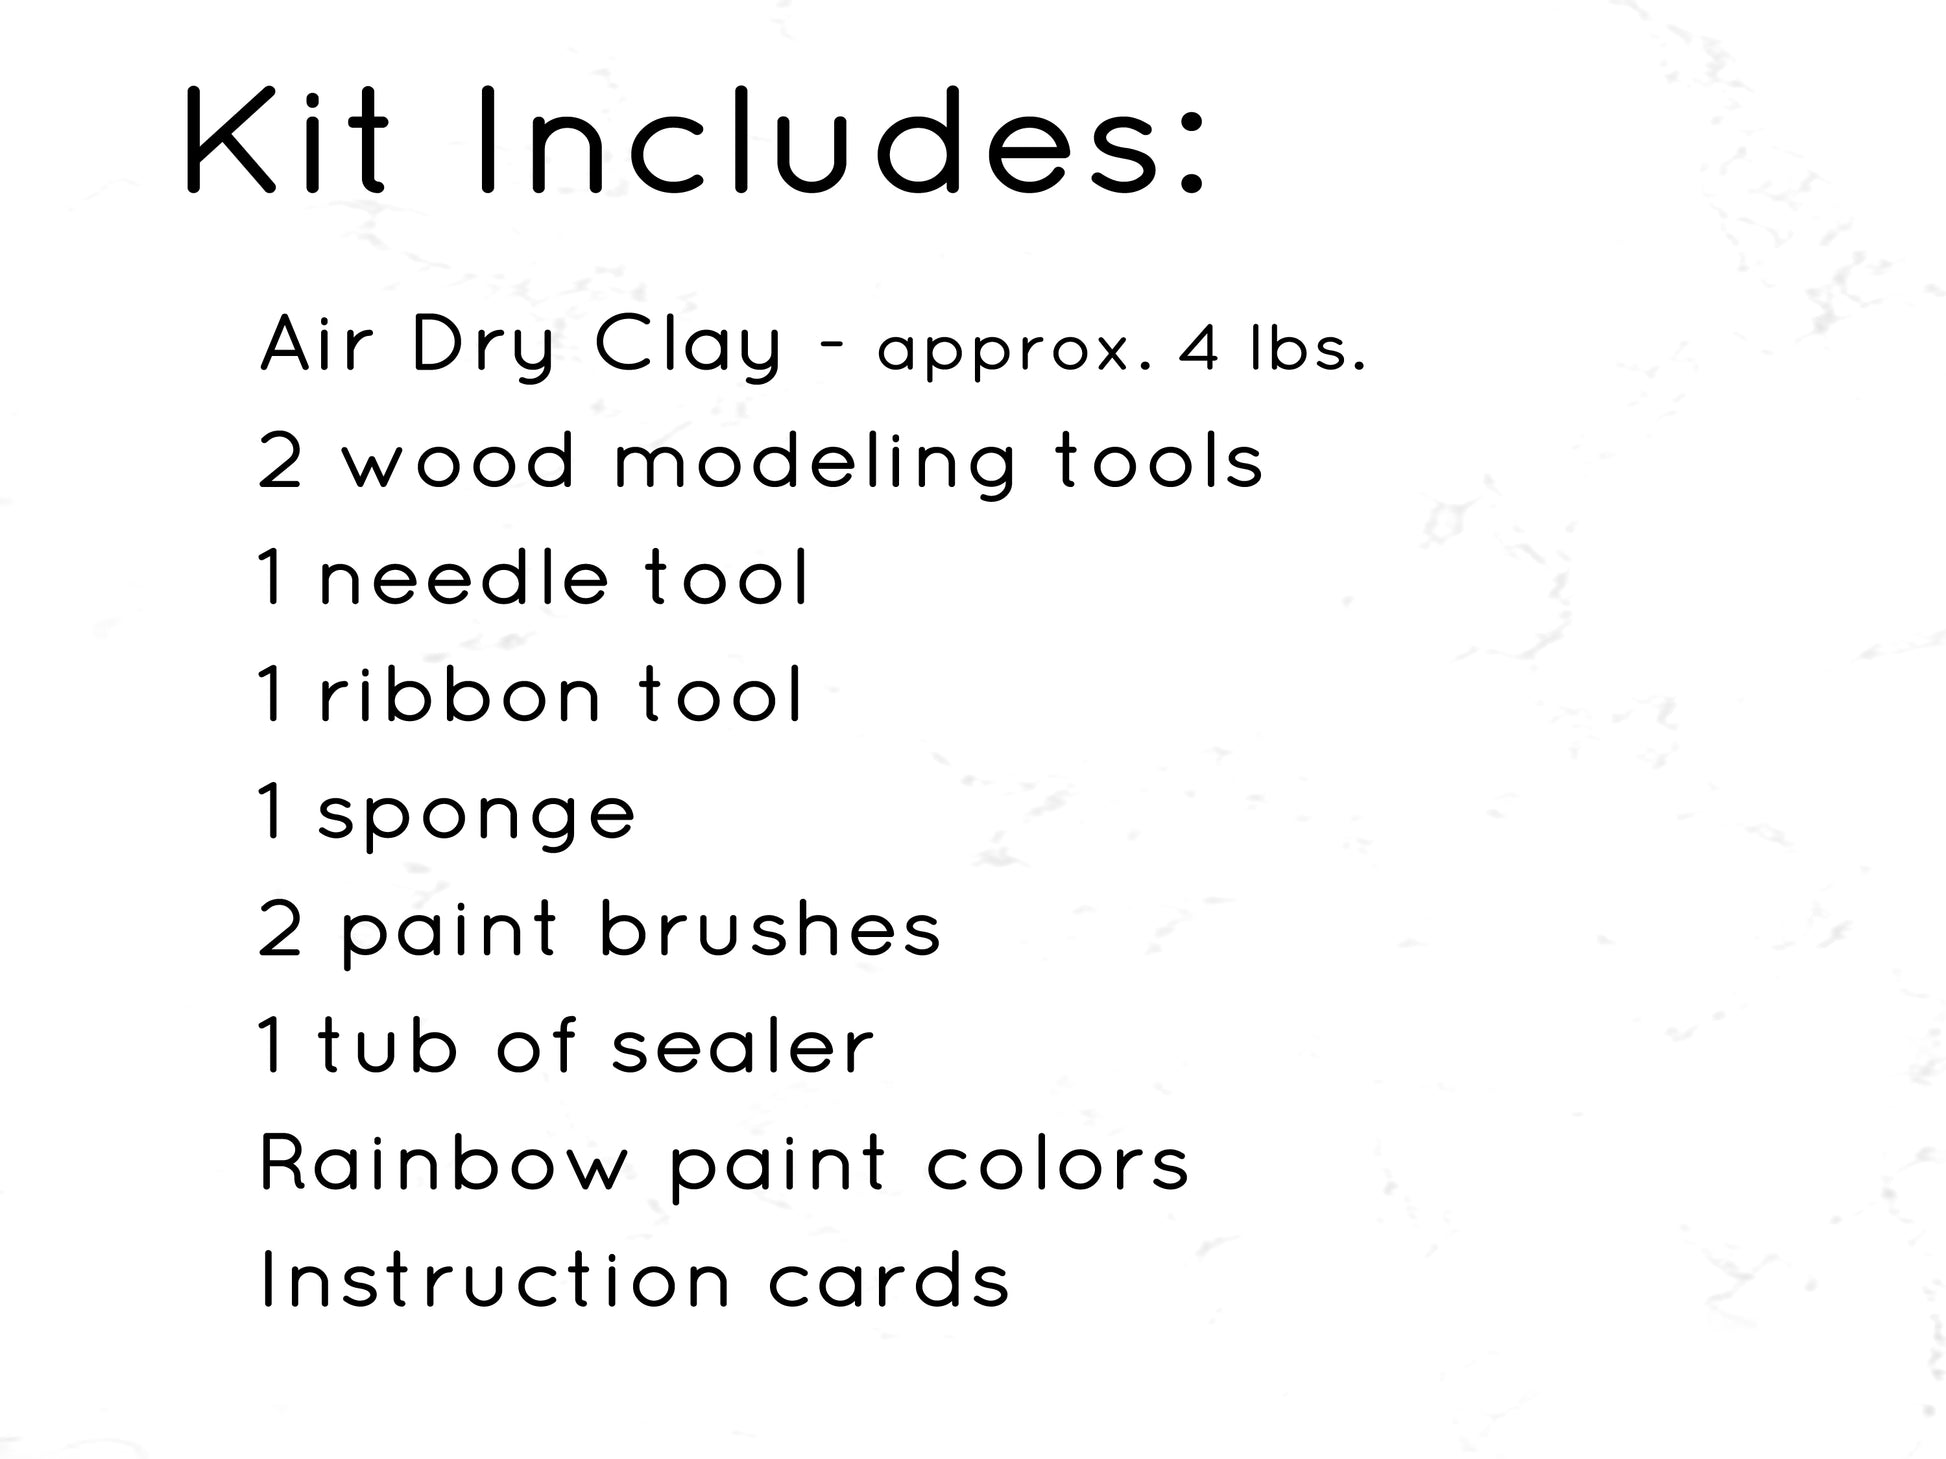 Air-dry pottery kit